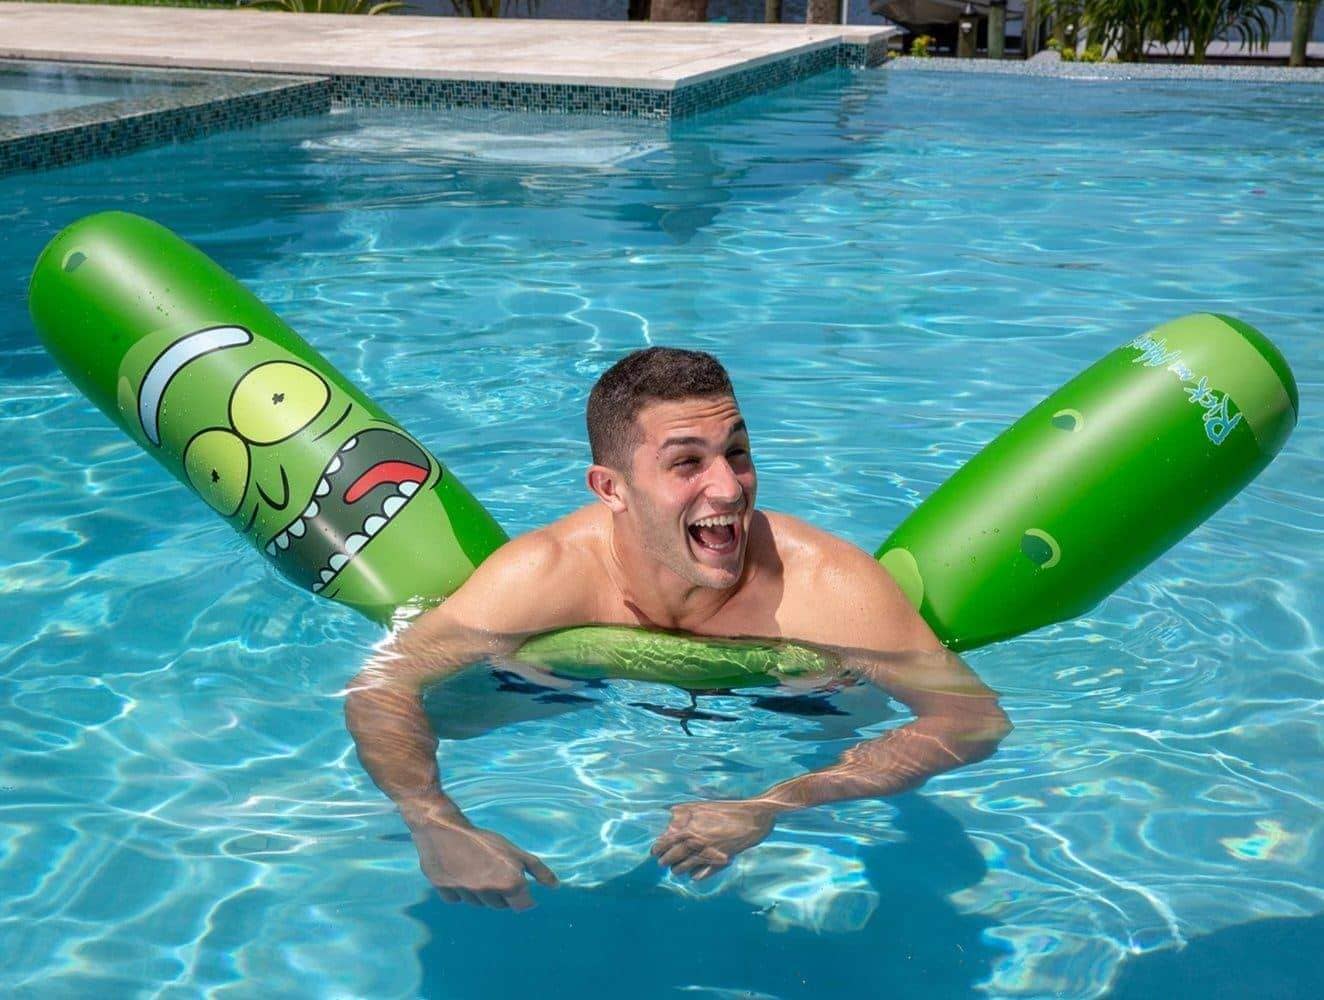 Rick and Morty Pickle Rick Inflatable Pool Noodle Giant